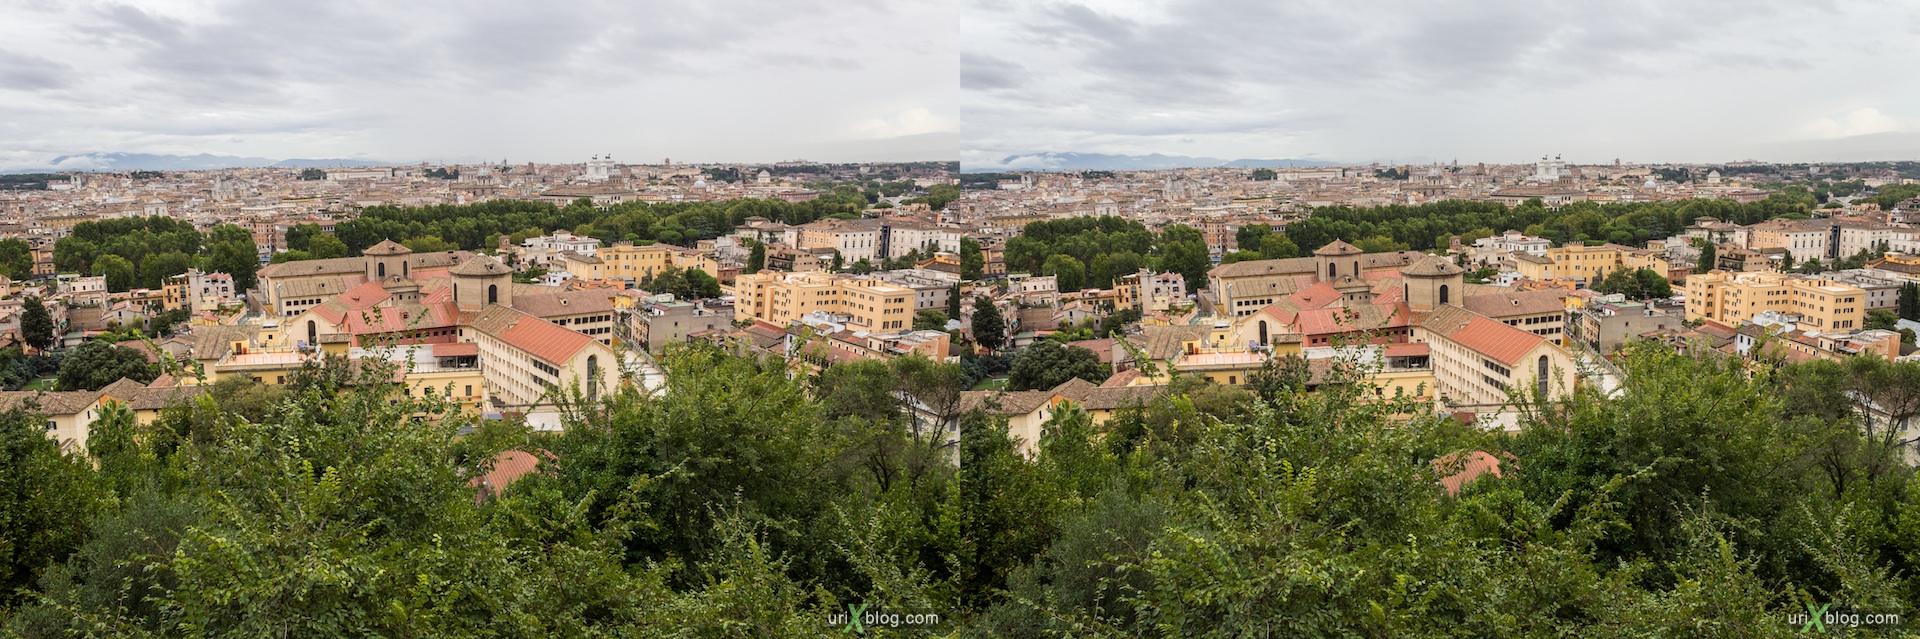 2012, Lighthouse of Gianicolo, Passeggiata del Gianicolo street, viewpoint, panorama, trees, city, Rome, Italy, Europe, 3D, stereo pair, cross-eyed, crossview, cross view stereo pair